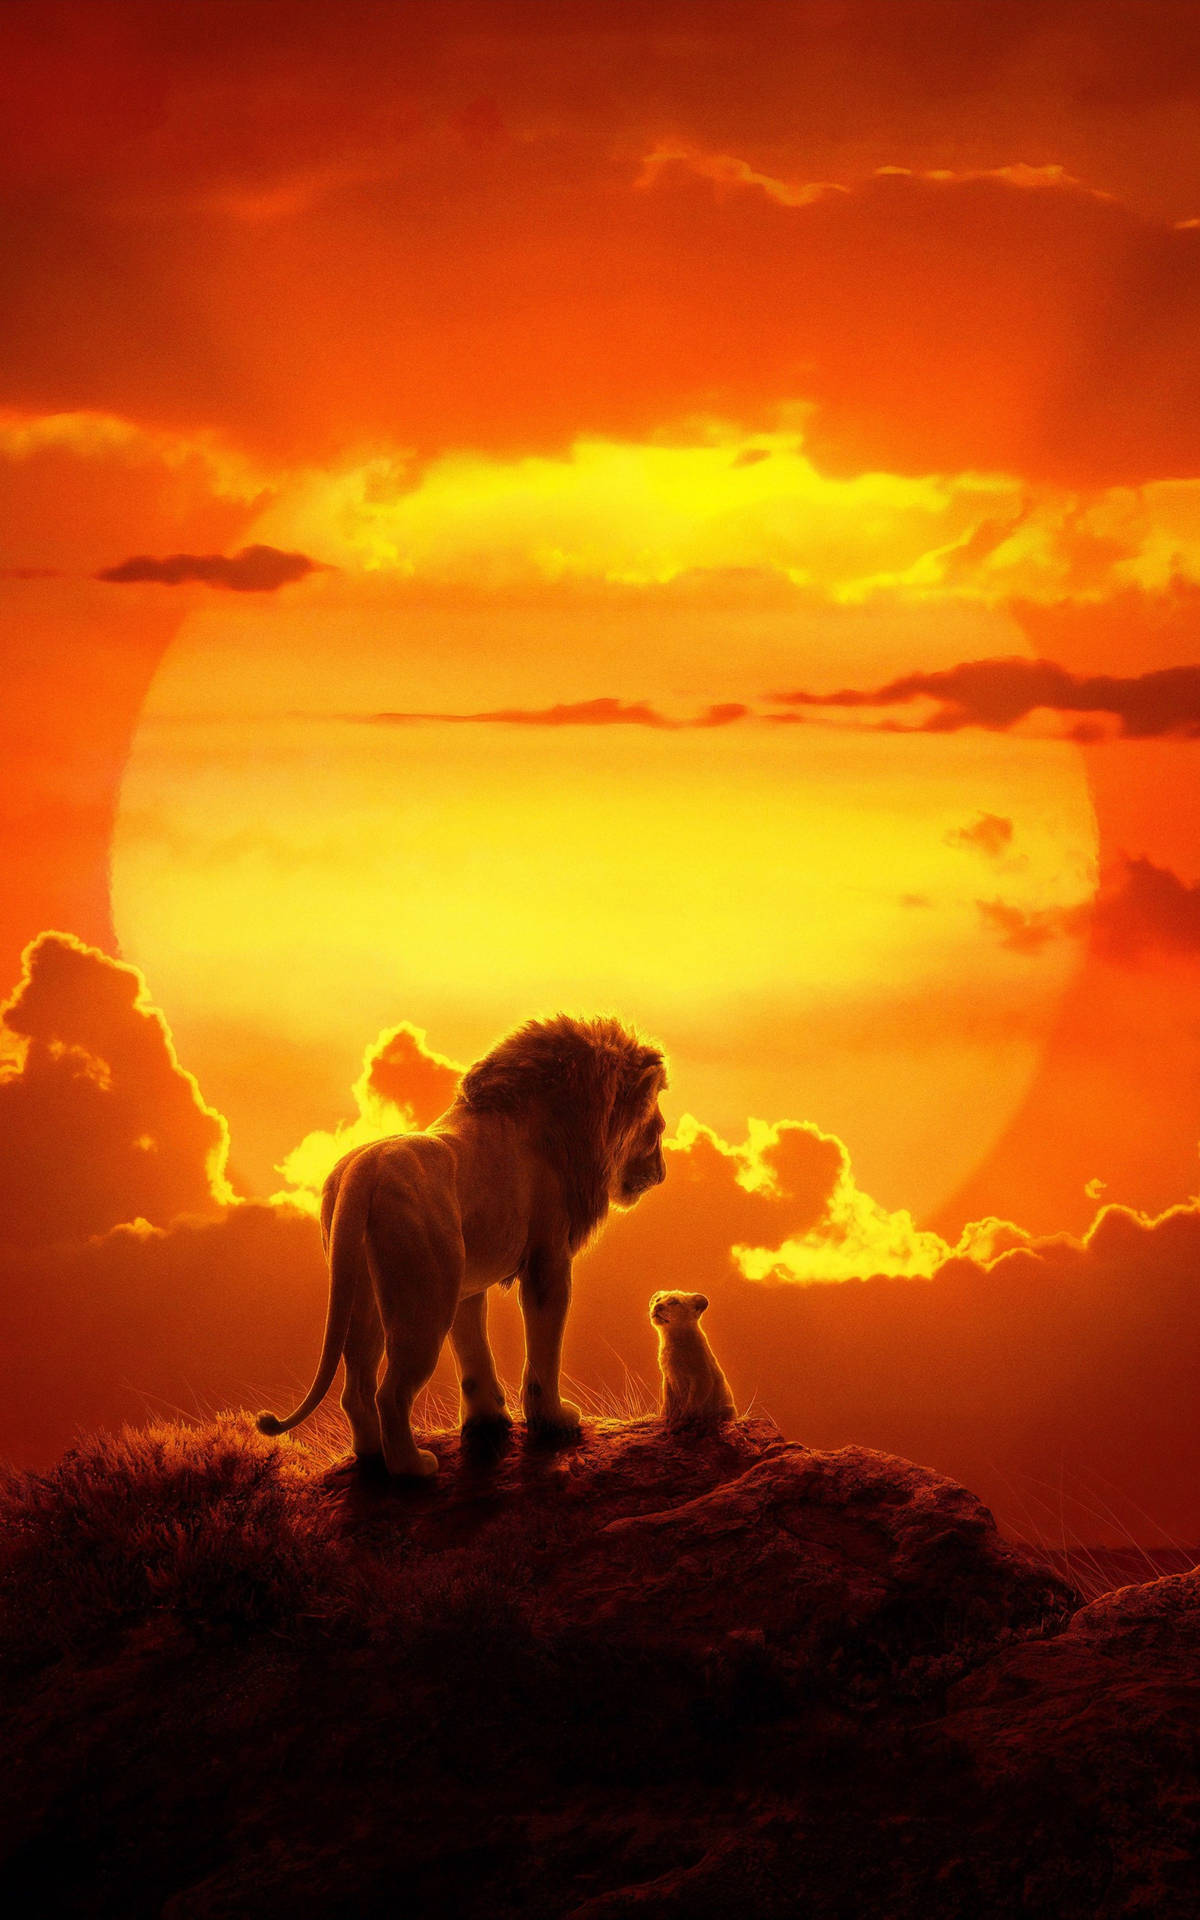 Simba watches the African Sunset Wallpaper